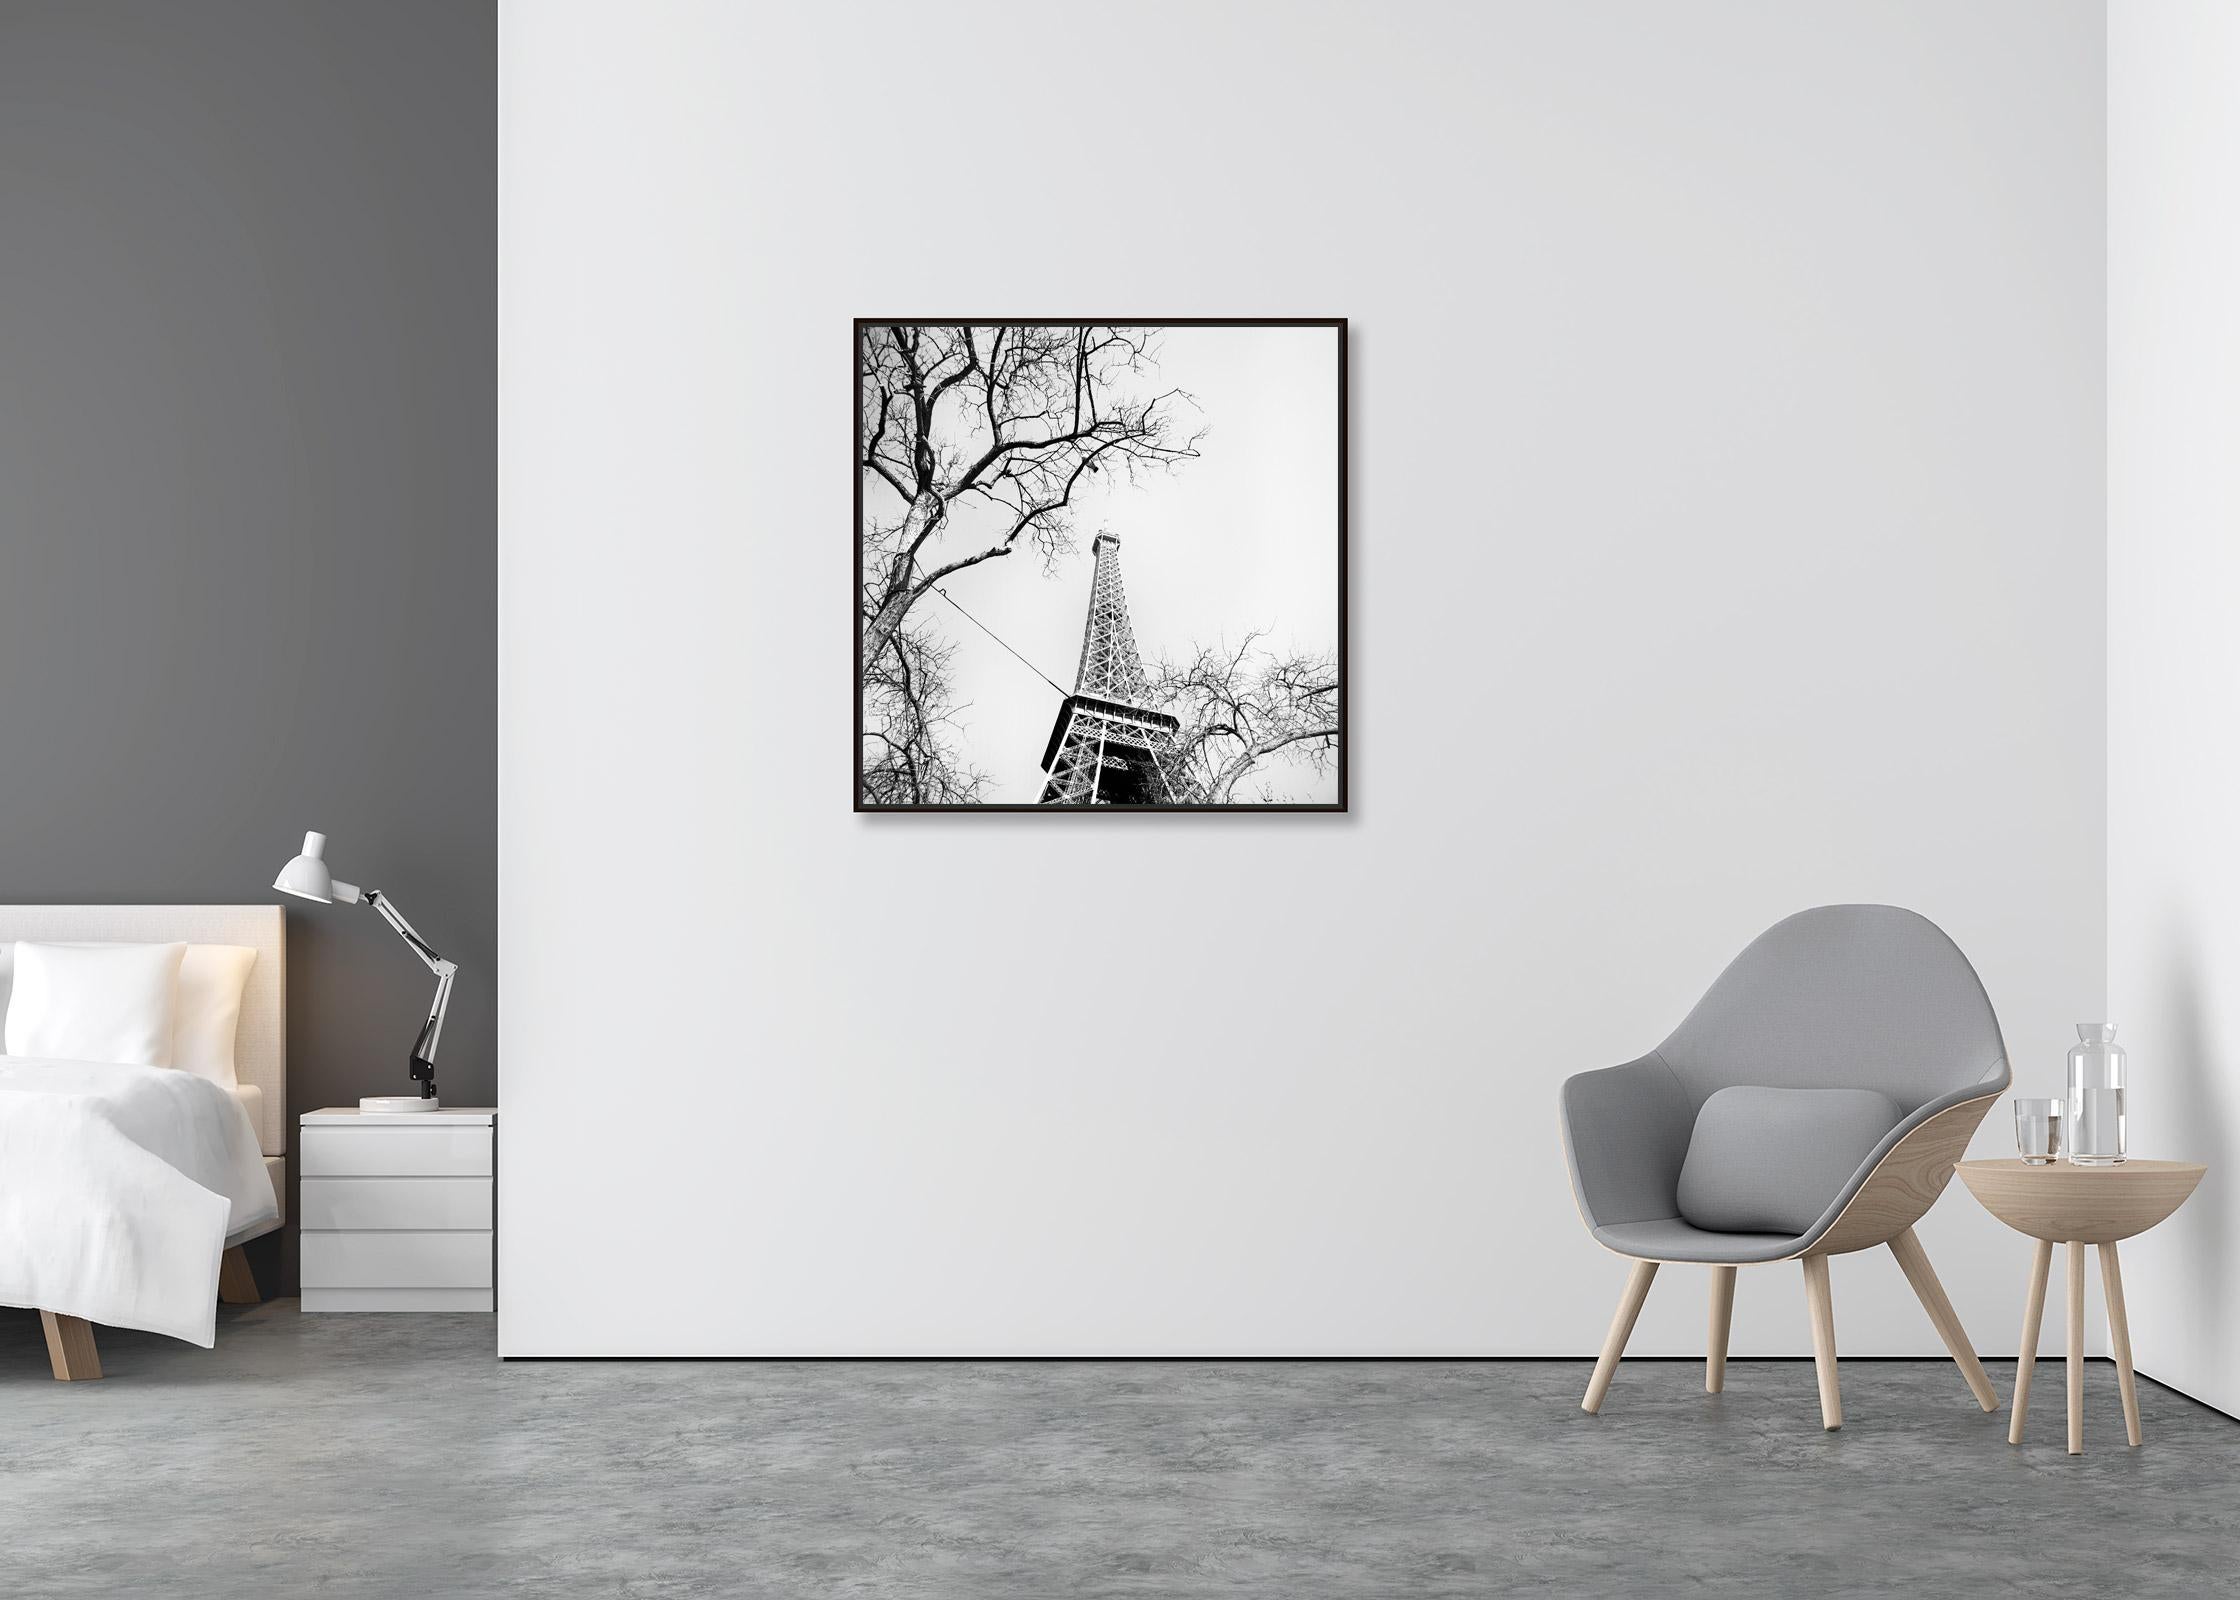 Pigeon and the Eiffel Tower, Paris, black & white cityscape fine art photography - Contemporary Photograph by Gerald Berghammer